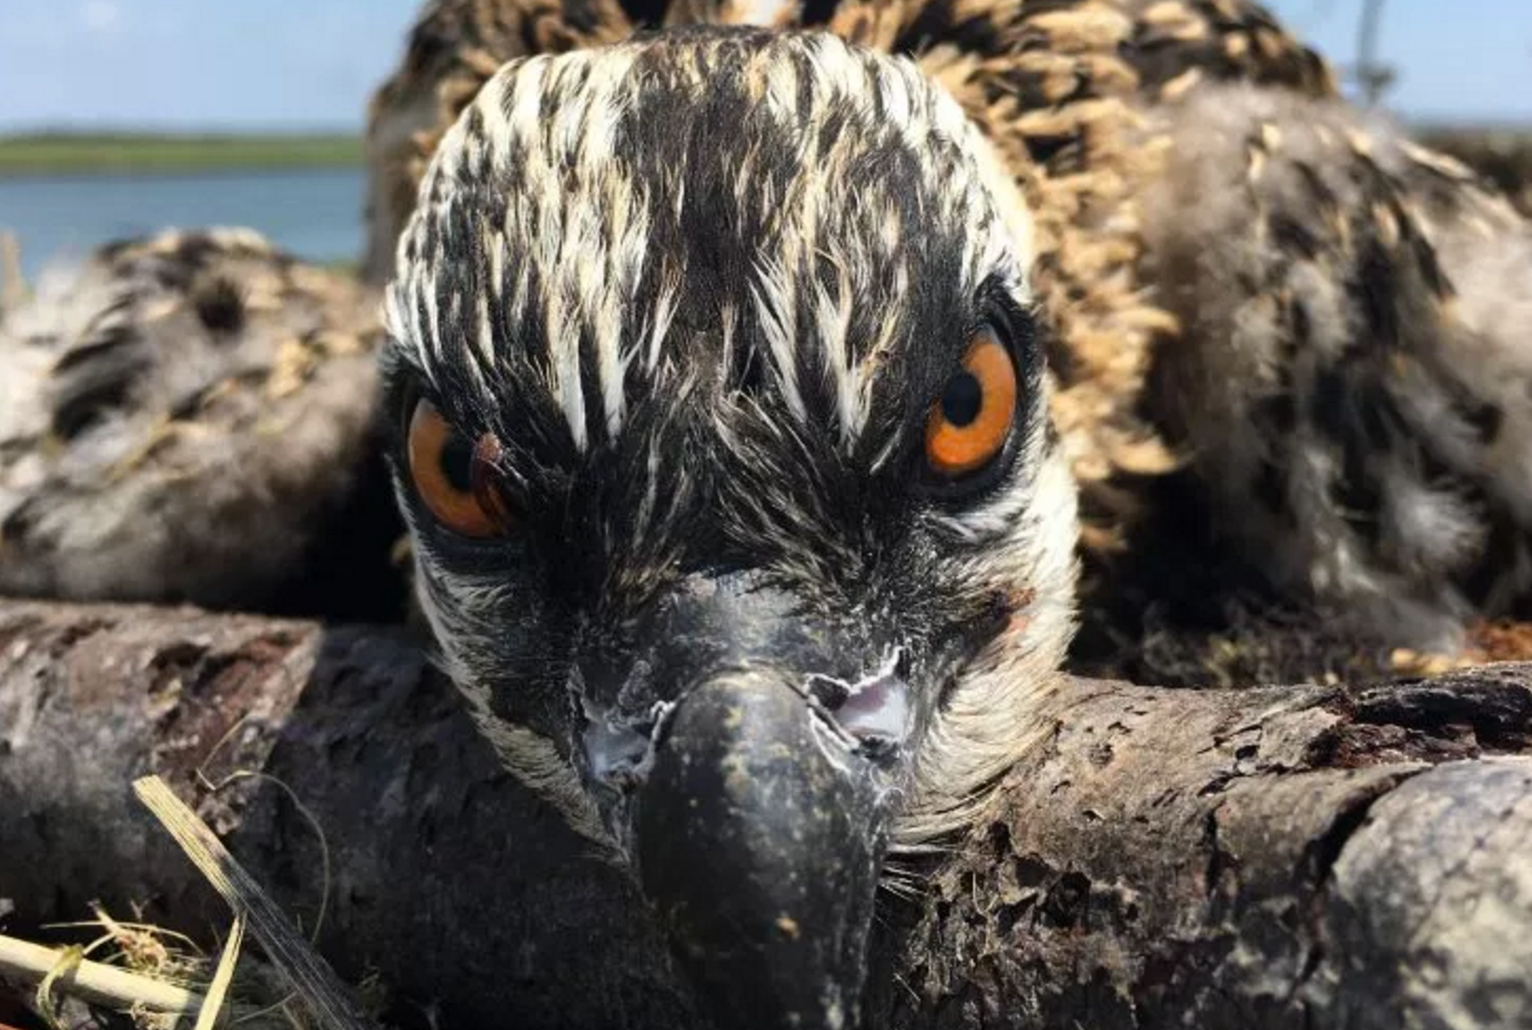 A young osprey that remained in its nest during Tuesday's thunderstorms in Cape May County. (Photo: Ben Wurst)